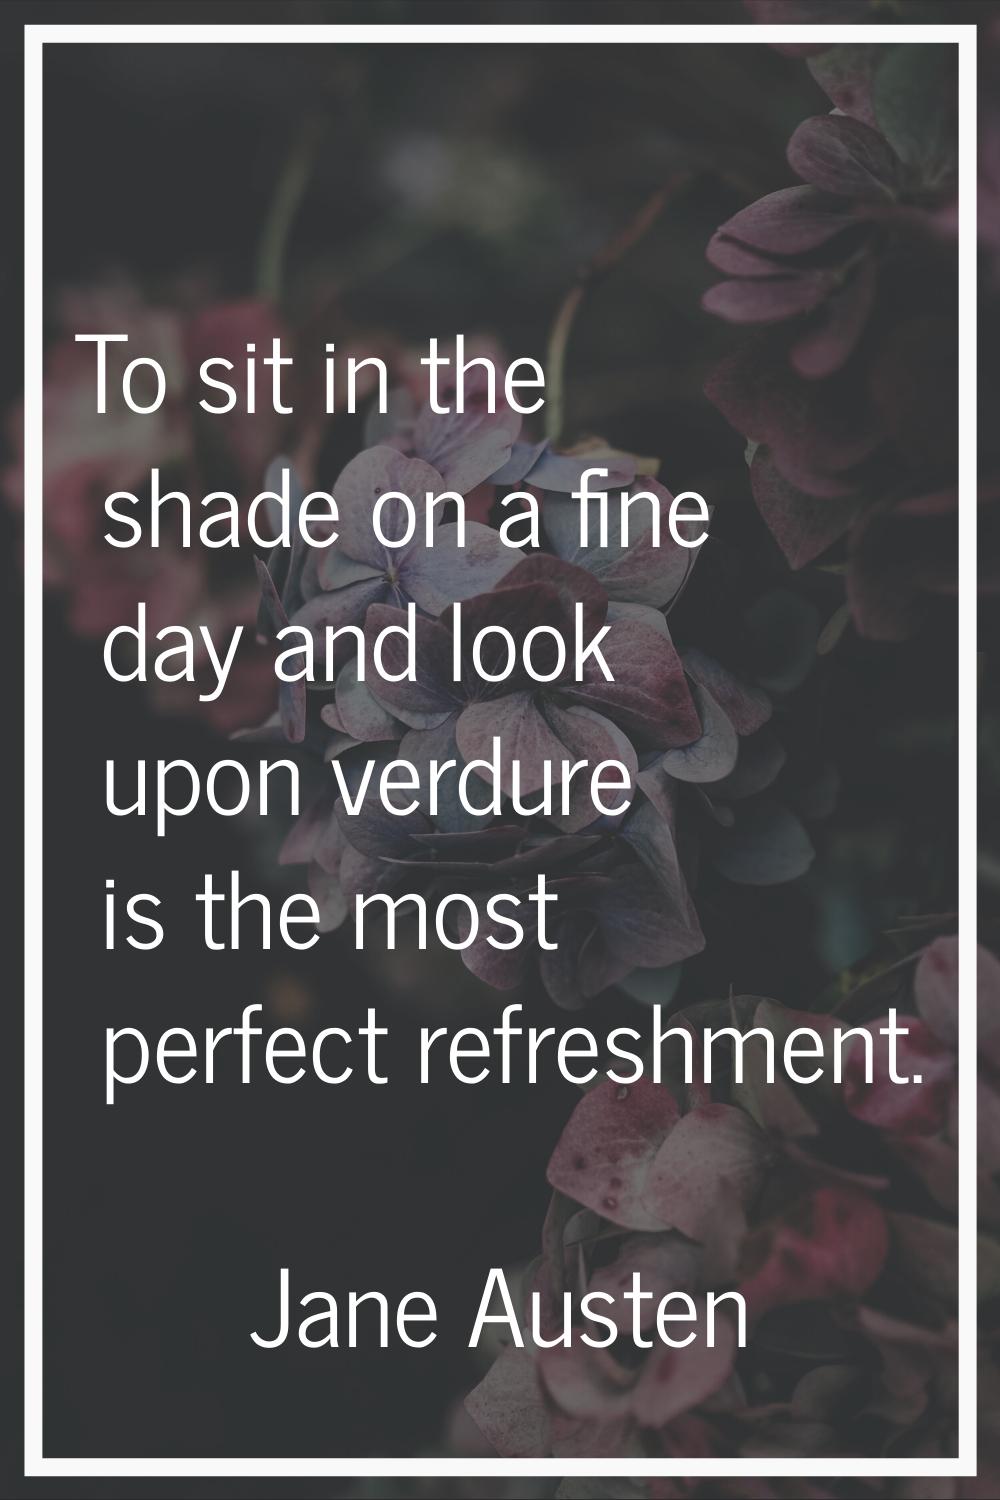 To sit in the shade on a fine day and look upon verdure is the most perfect refreshment.